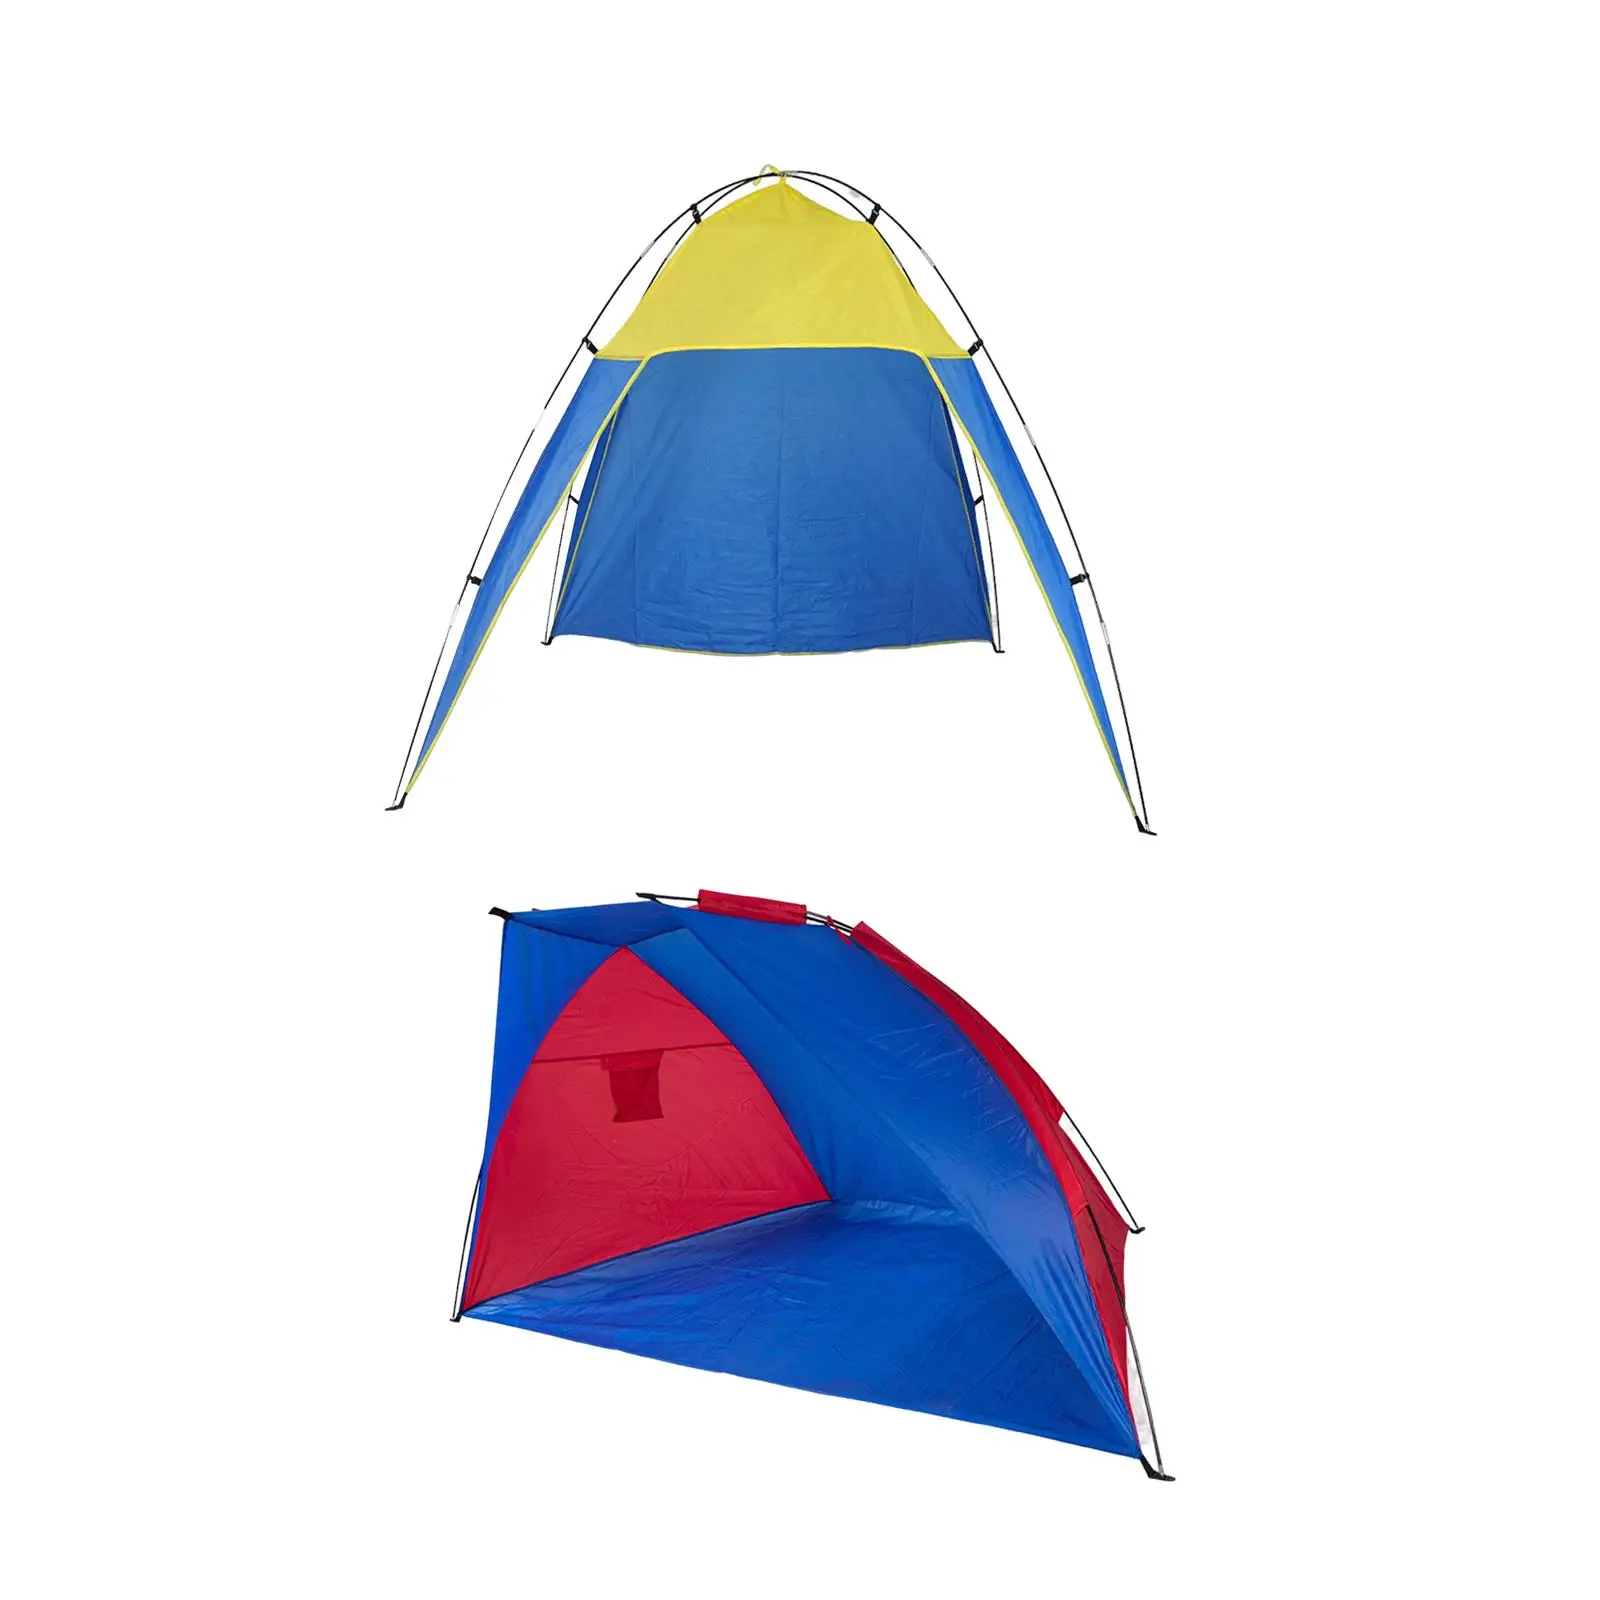 Portable Sun Shade Tent Canopy Waterproof Picnic Camping Beach Sun Shelter for Backpacking Traveling Fishing Garden Summer